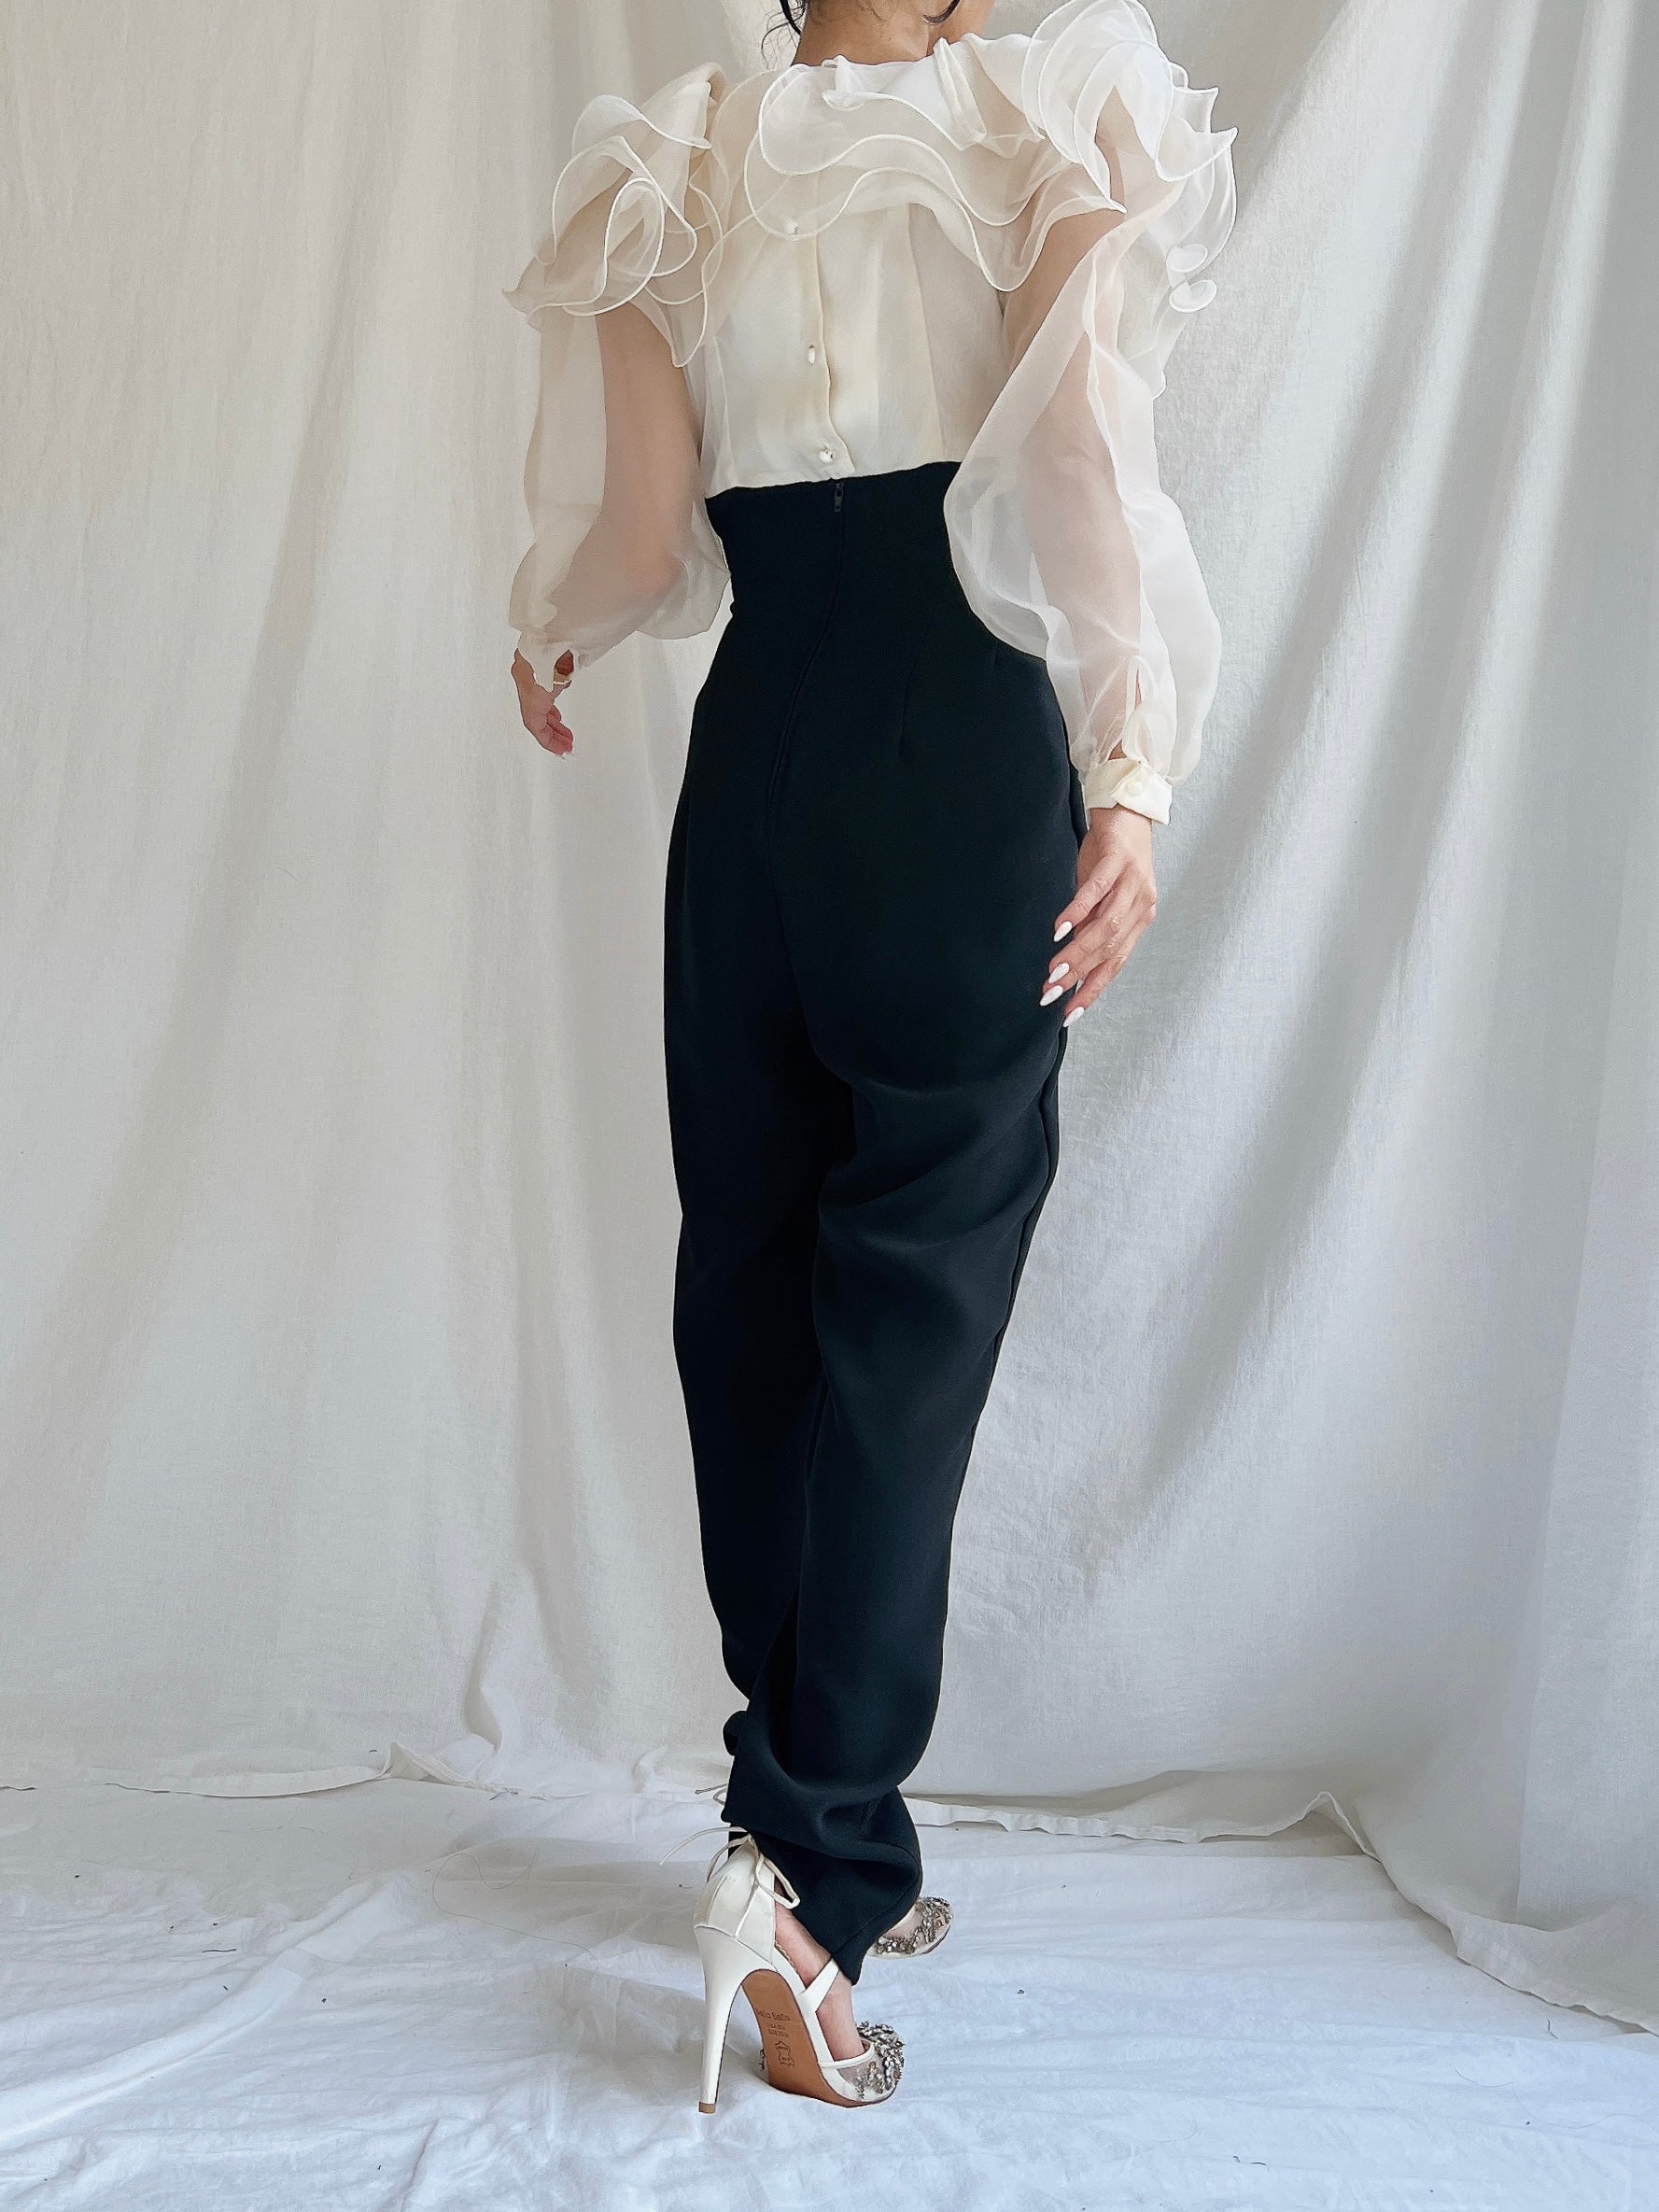 Vintage Organza and Rayon Jumpsuit/Romper - S